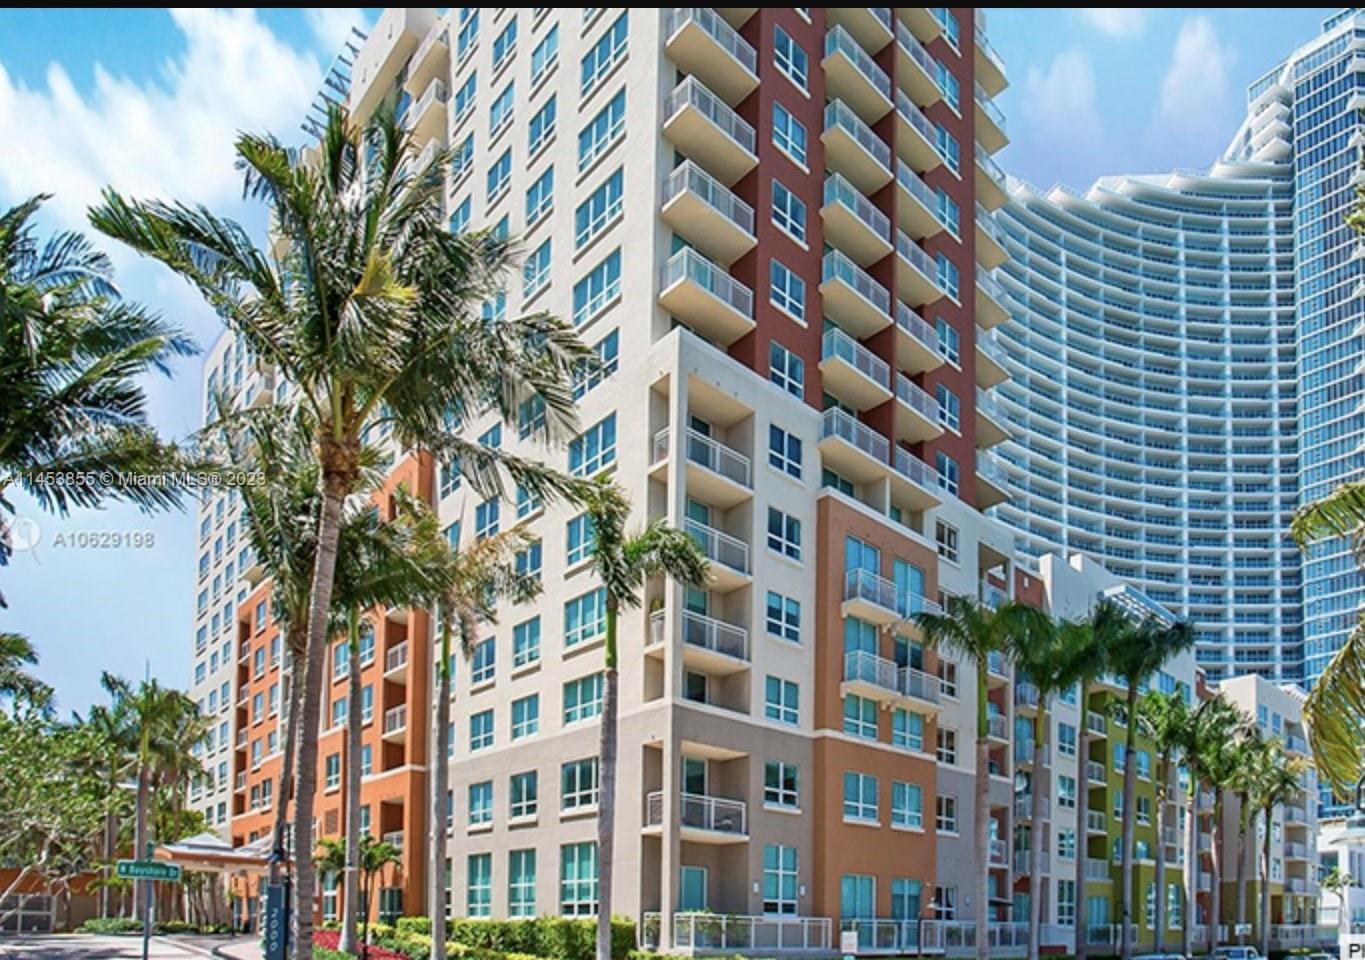 ****Opportunity to own a condo in the sought-after area of Edgewater at an amazing price! Just acros